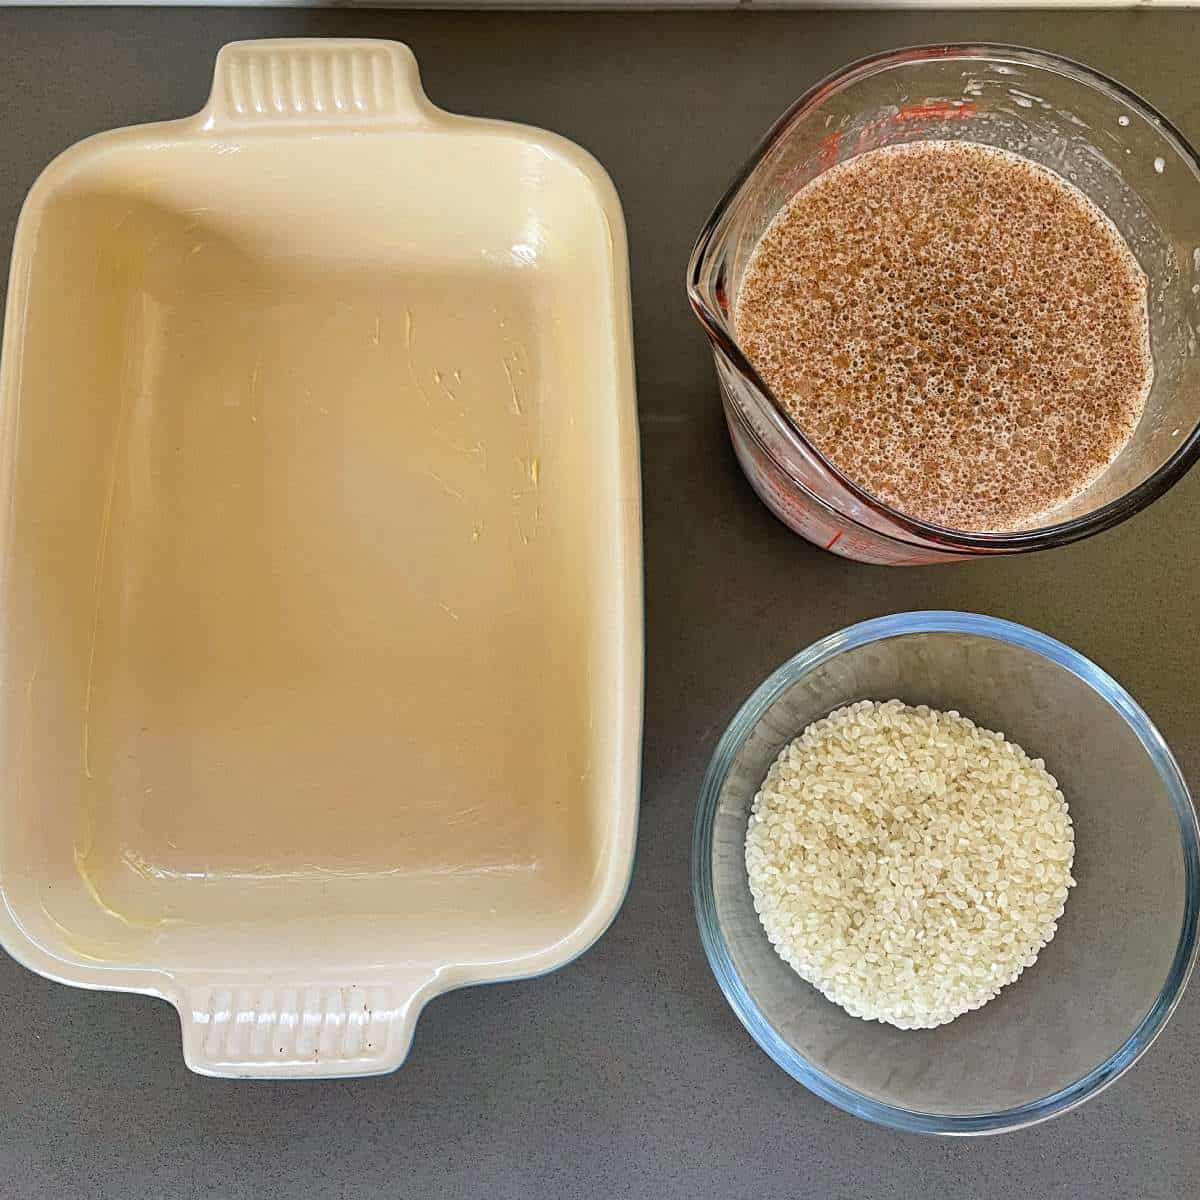 Two different dishes filled with the wet and dry ingredients for a rice pudding beside a ovenproof dish sitting on a grey bench